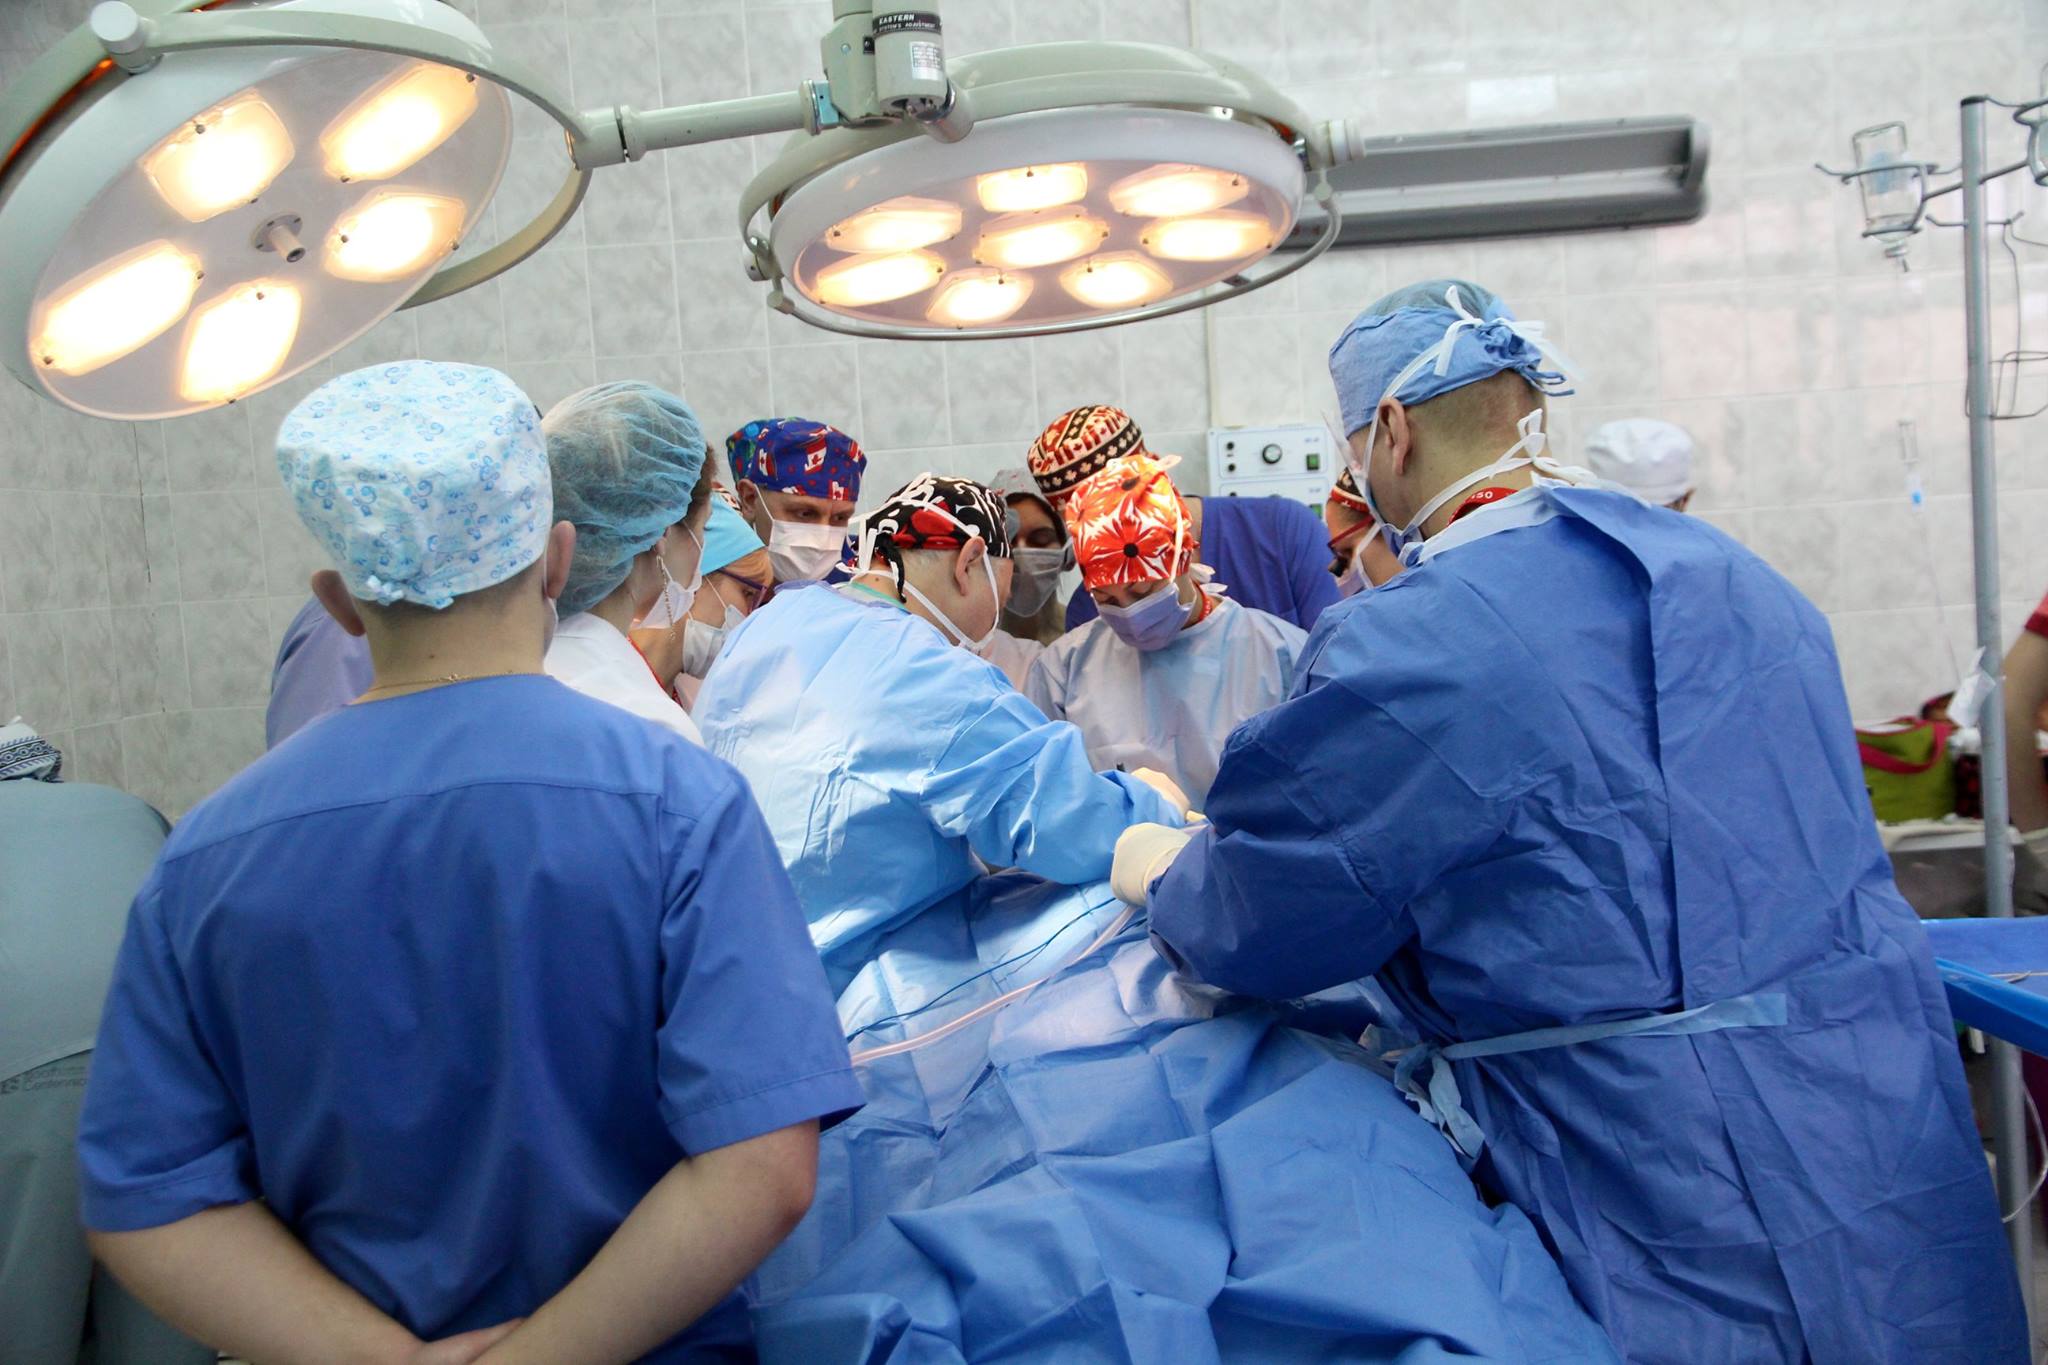 Fifth mission of Canadian surgeons will provide free surgeries to Ukrainian soldiers